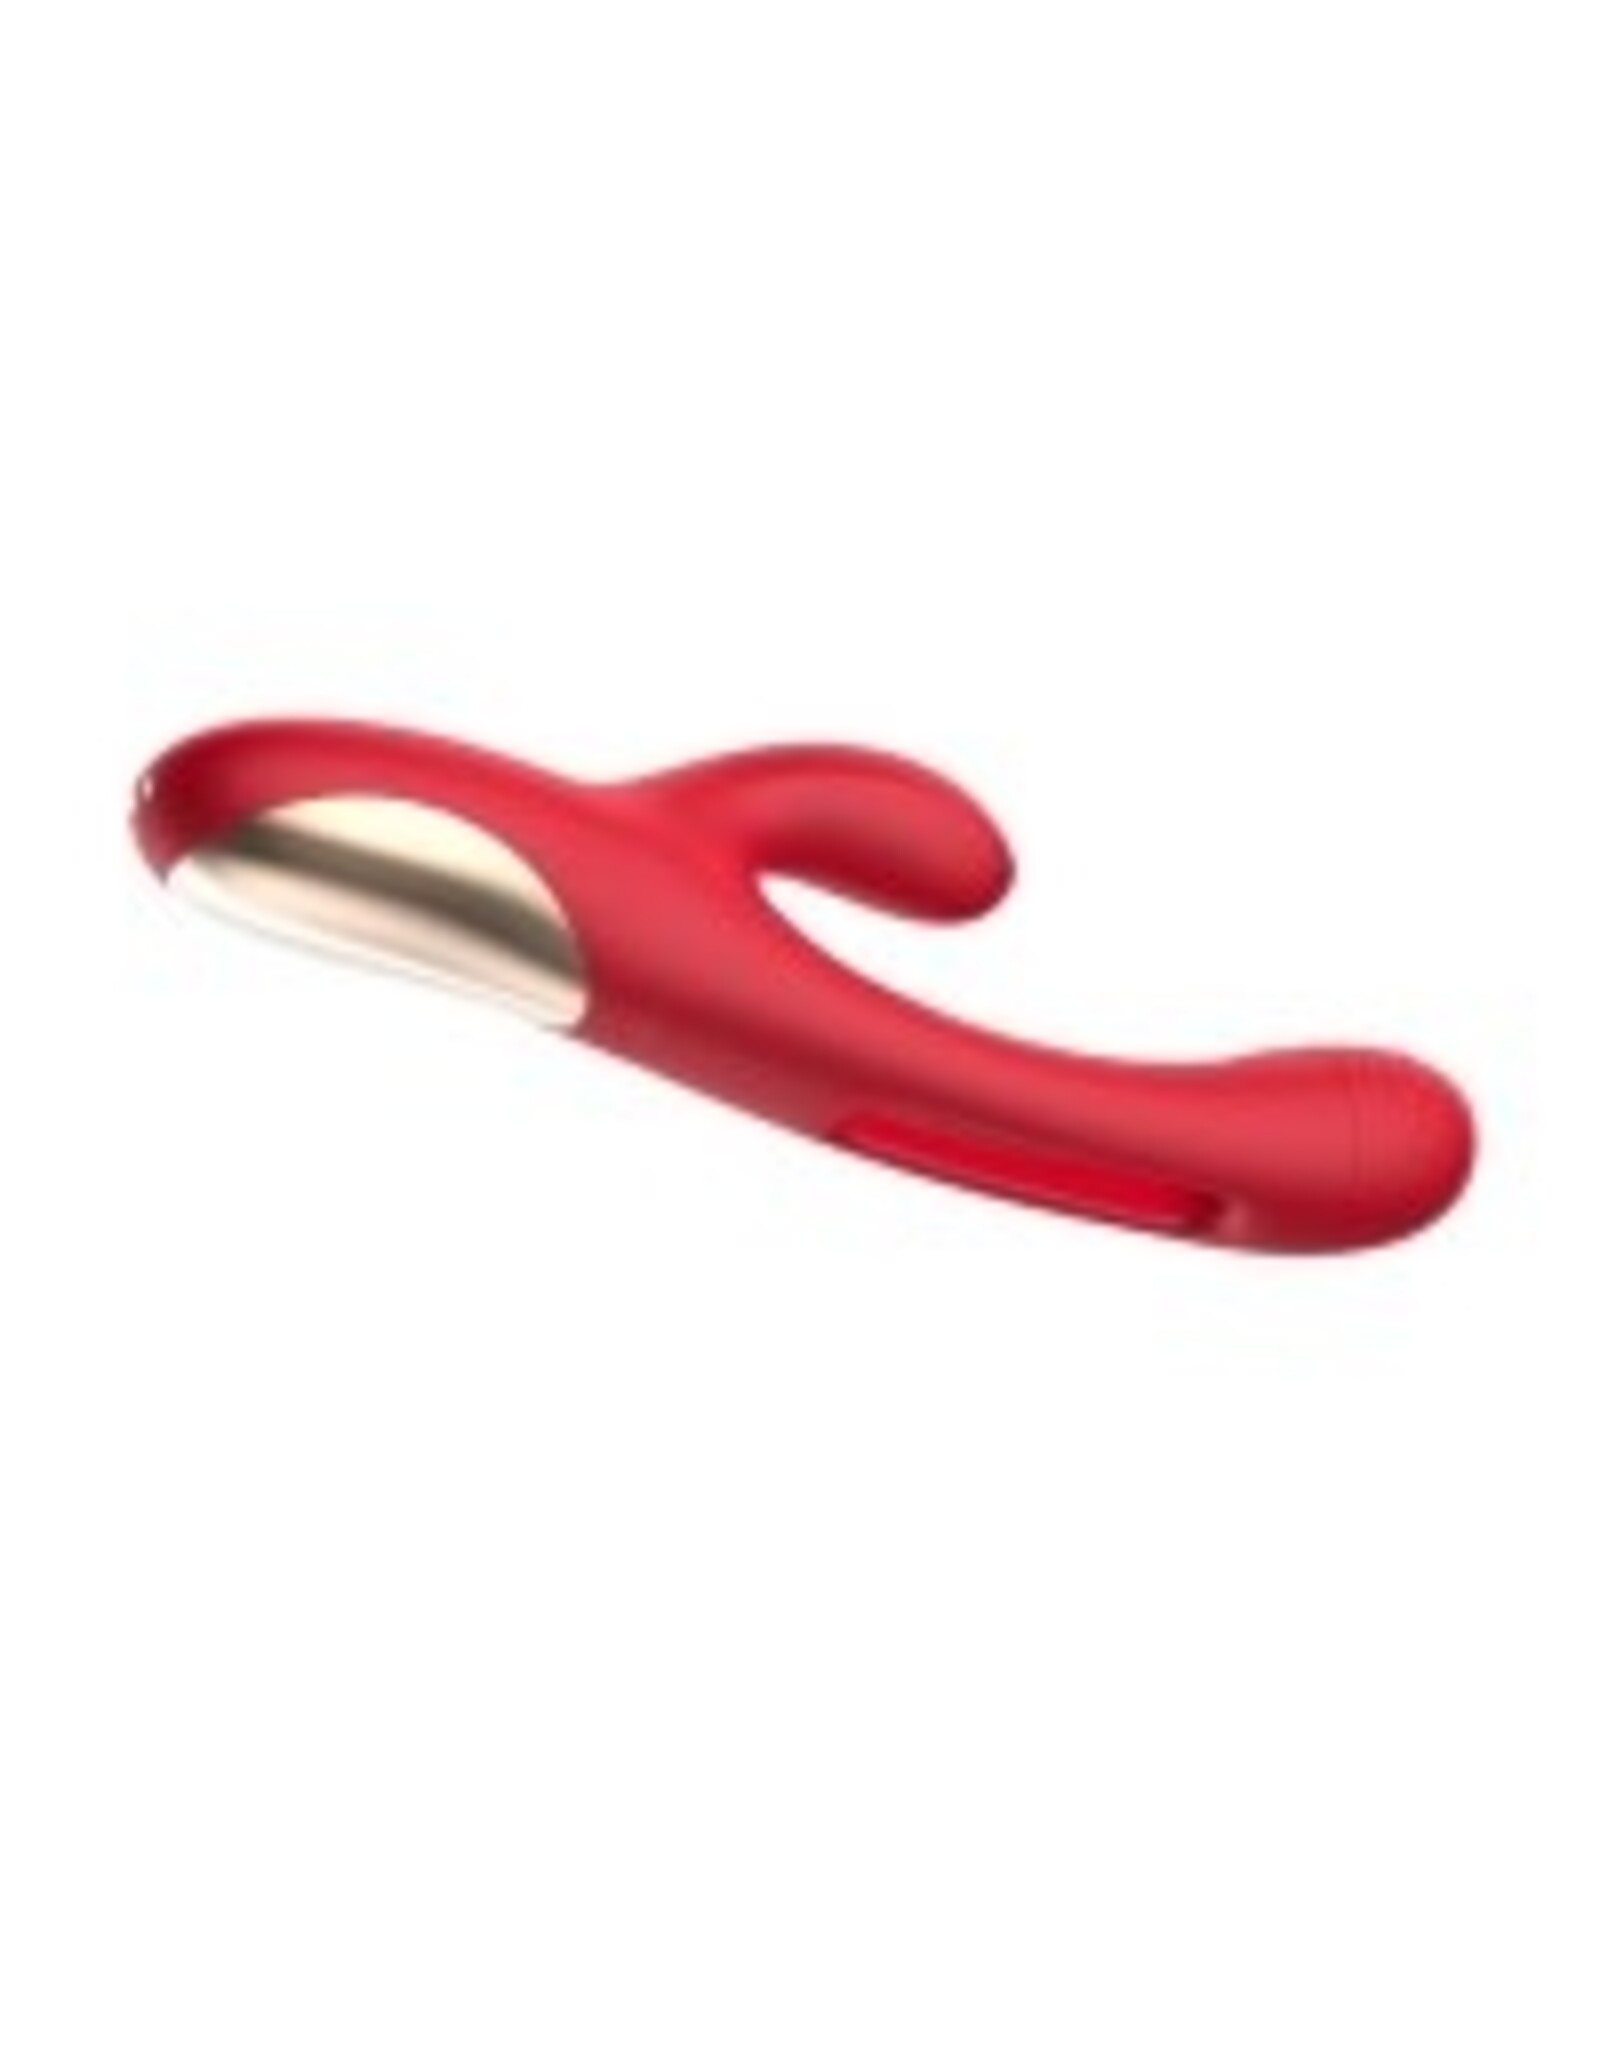 Tracy's Dog Tracy’s Dog - Rabbit Vibrator with Flapping Stimulation - Red